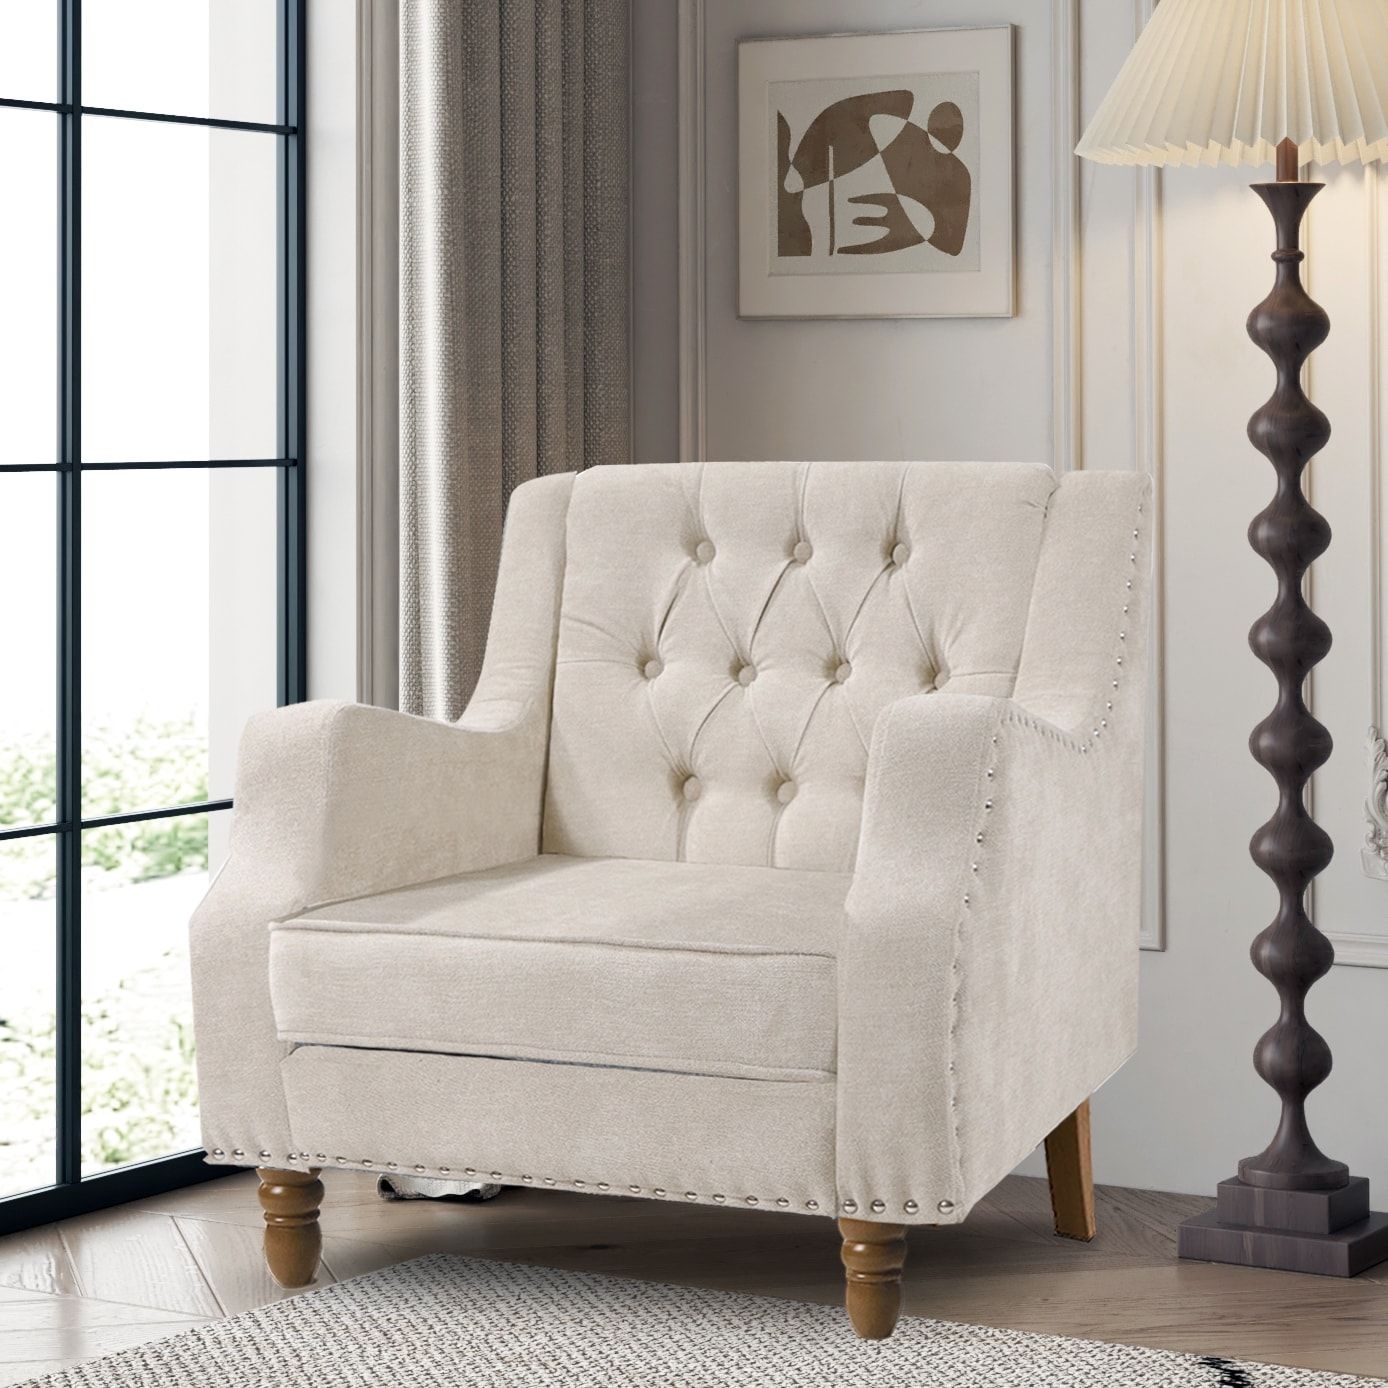 Livingroom Accent Chair, Armchair With Vintage Brass Studs, Button Tufted  Upholstered Armchair Comfy Reading Chair For Bedroom – Bed Bath & Beyond –  37871459 Regarding Comfy Reading Armchairs (View 4 of 15)